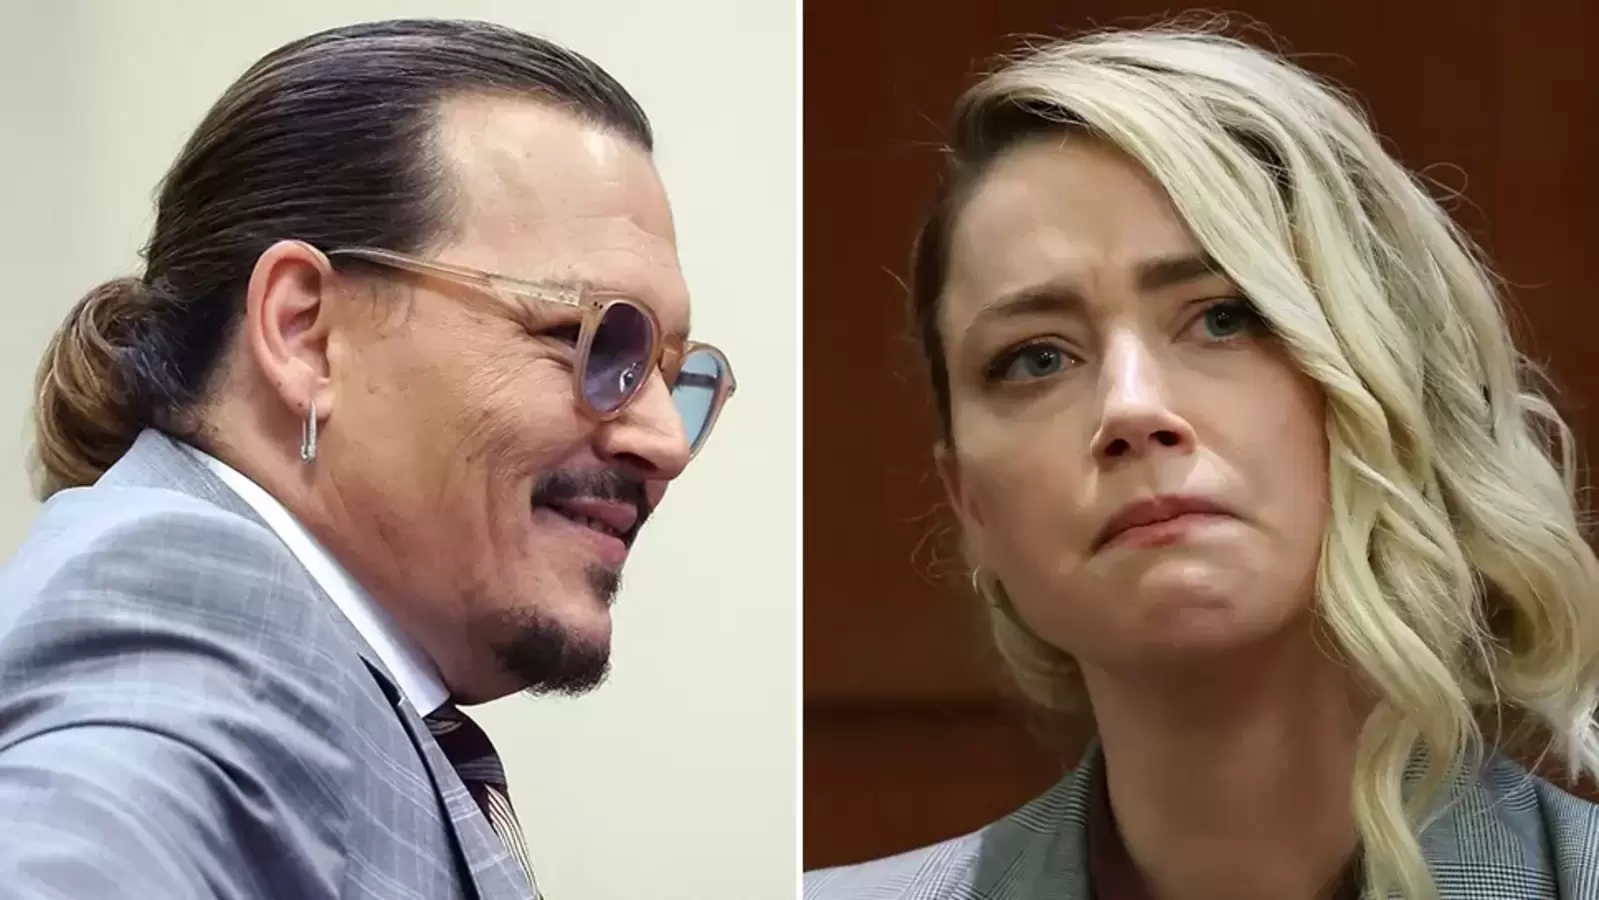 Demand for Johnny Depp's Dior fragrance soared during trial against Amber  Heard